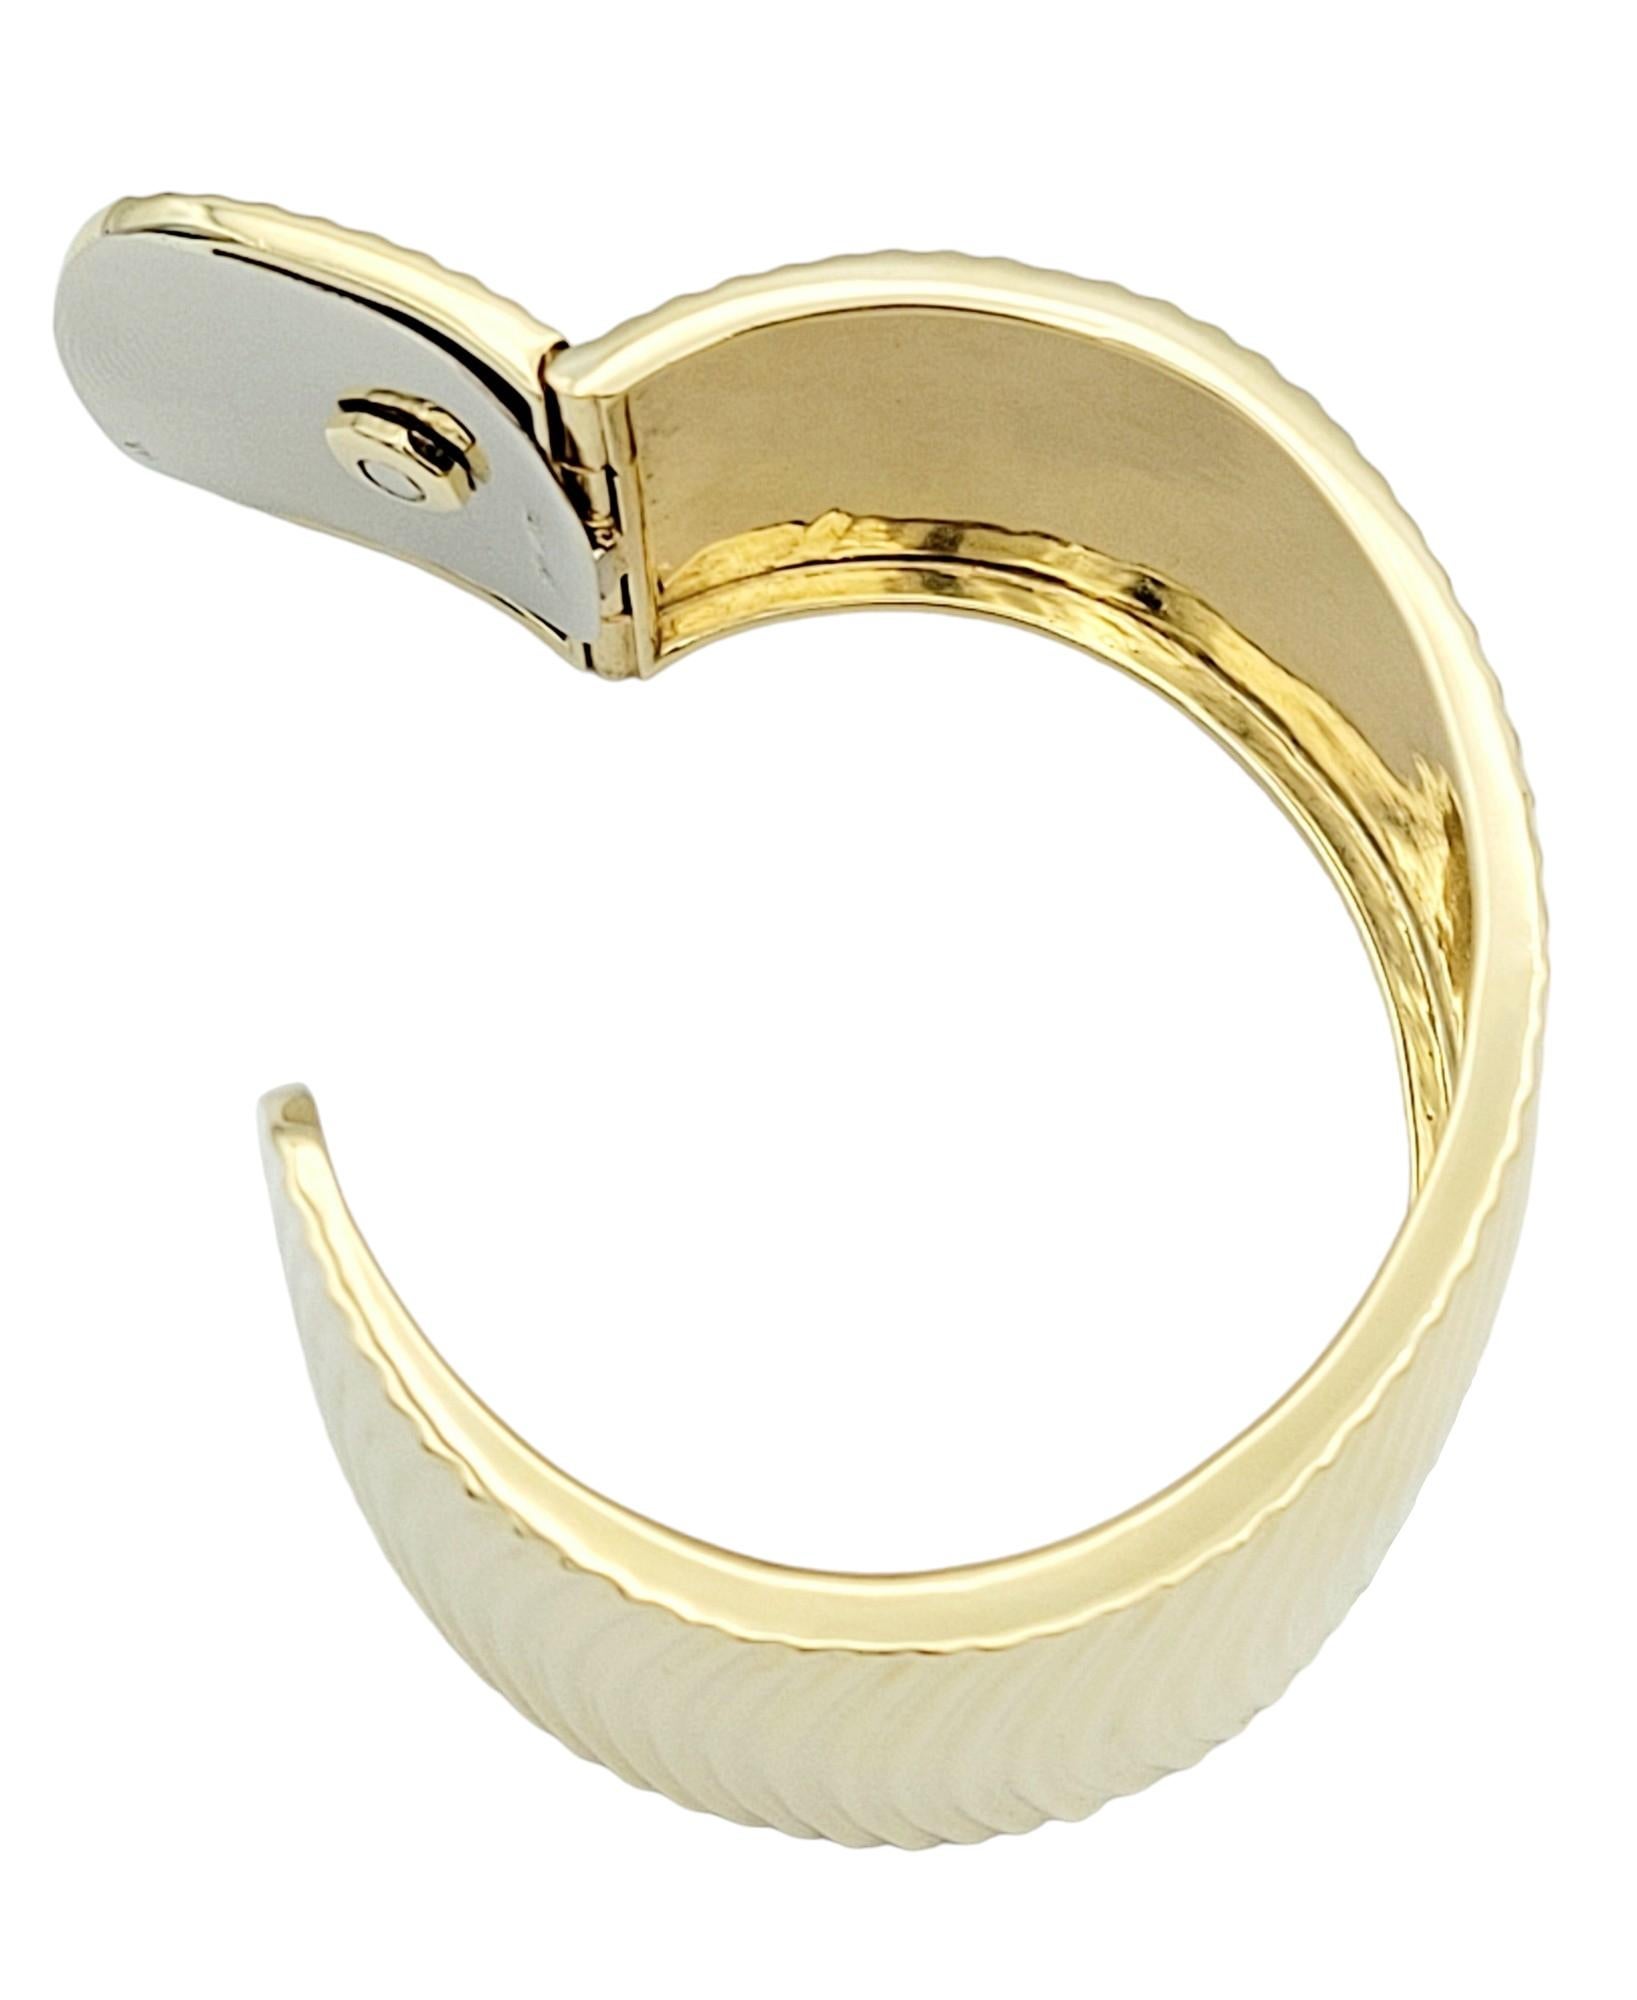 Wide Ridged Cuff Bracelet with Hinge Opening in Polished 14 Karat Yellow Gold  For Sale 1